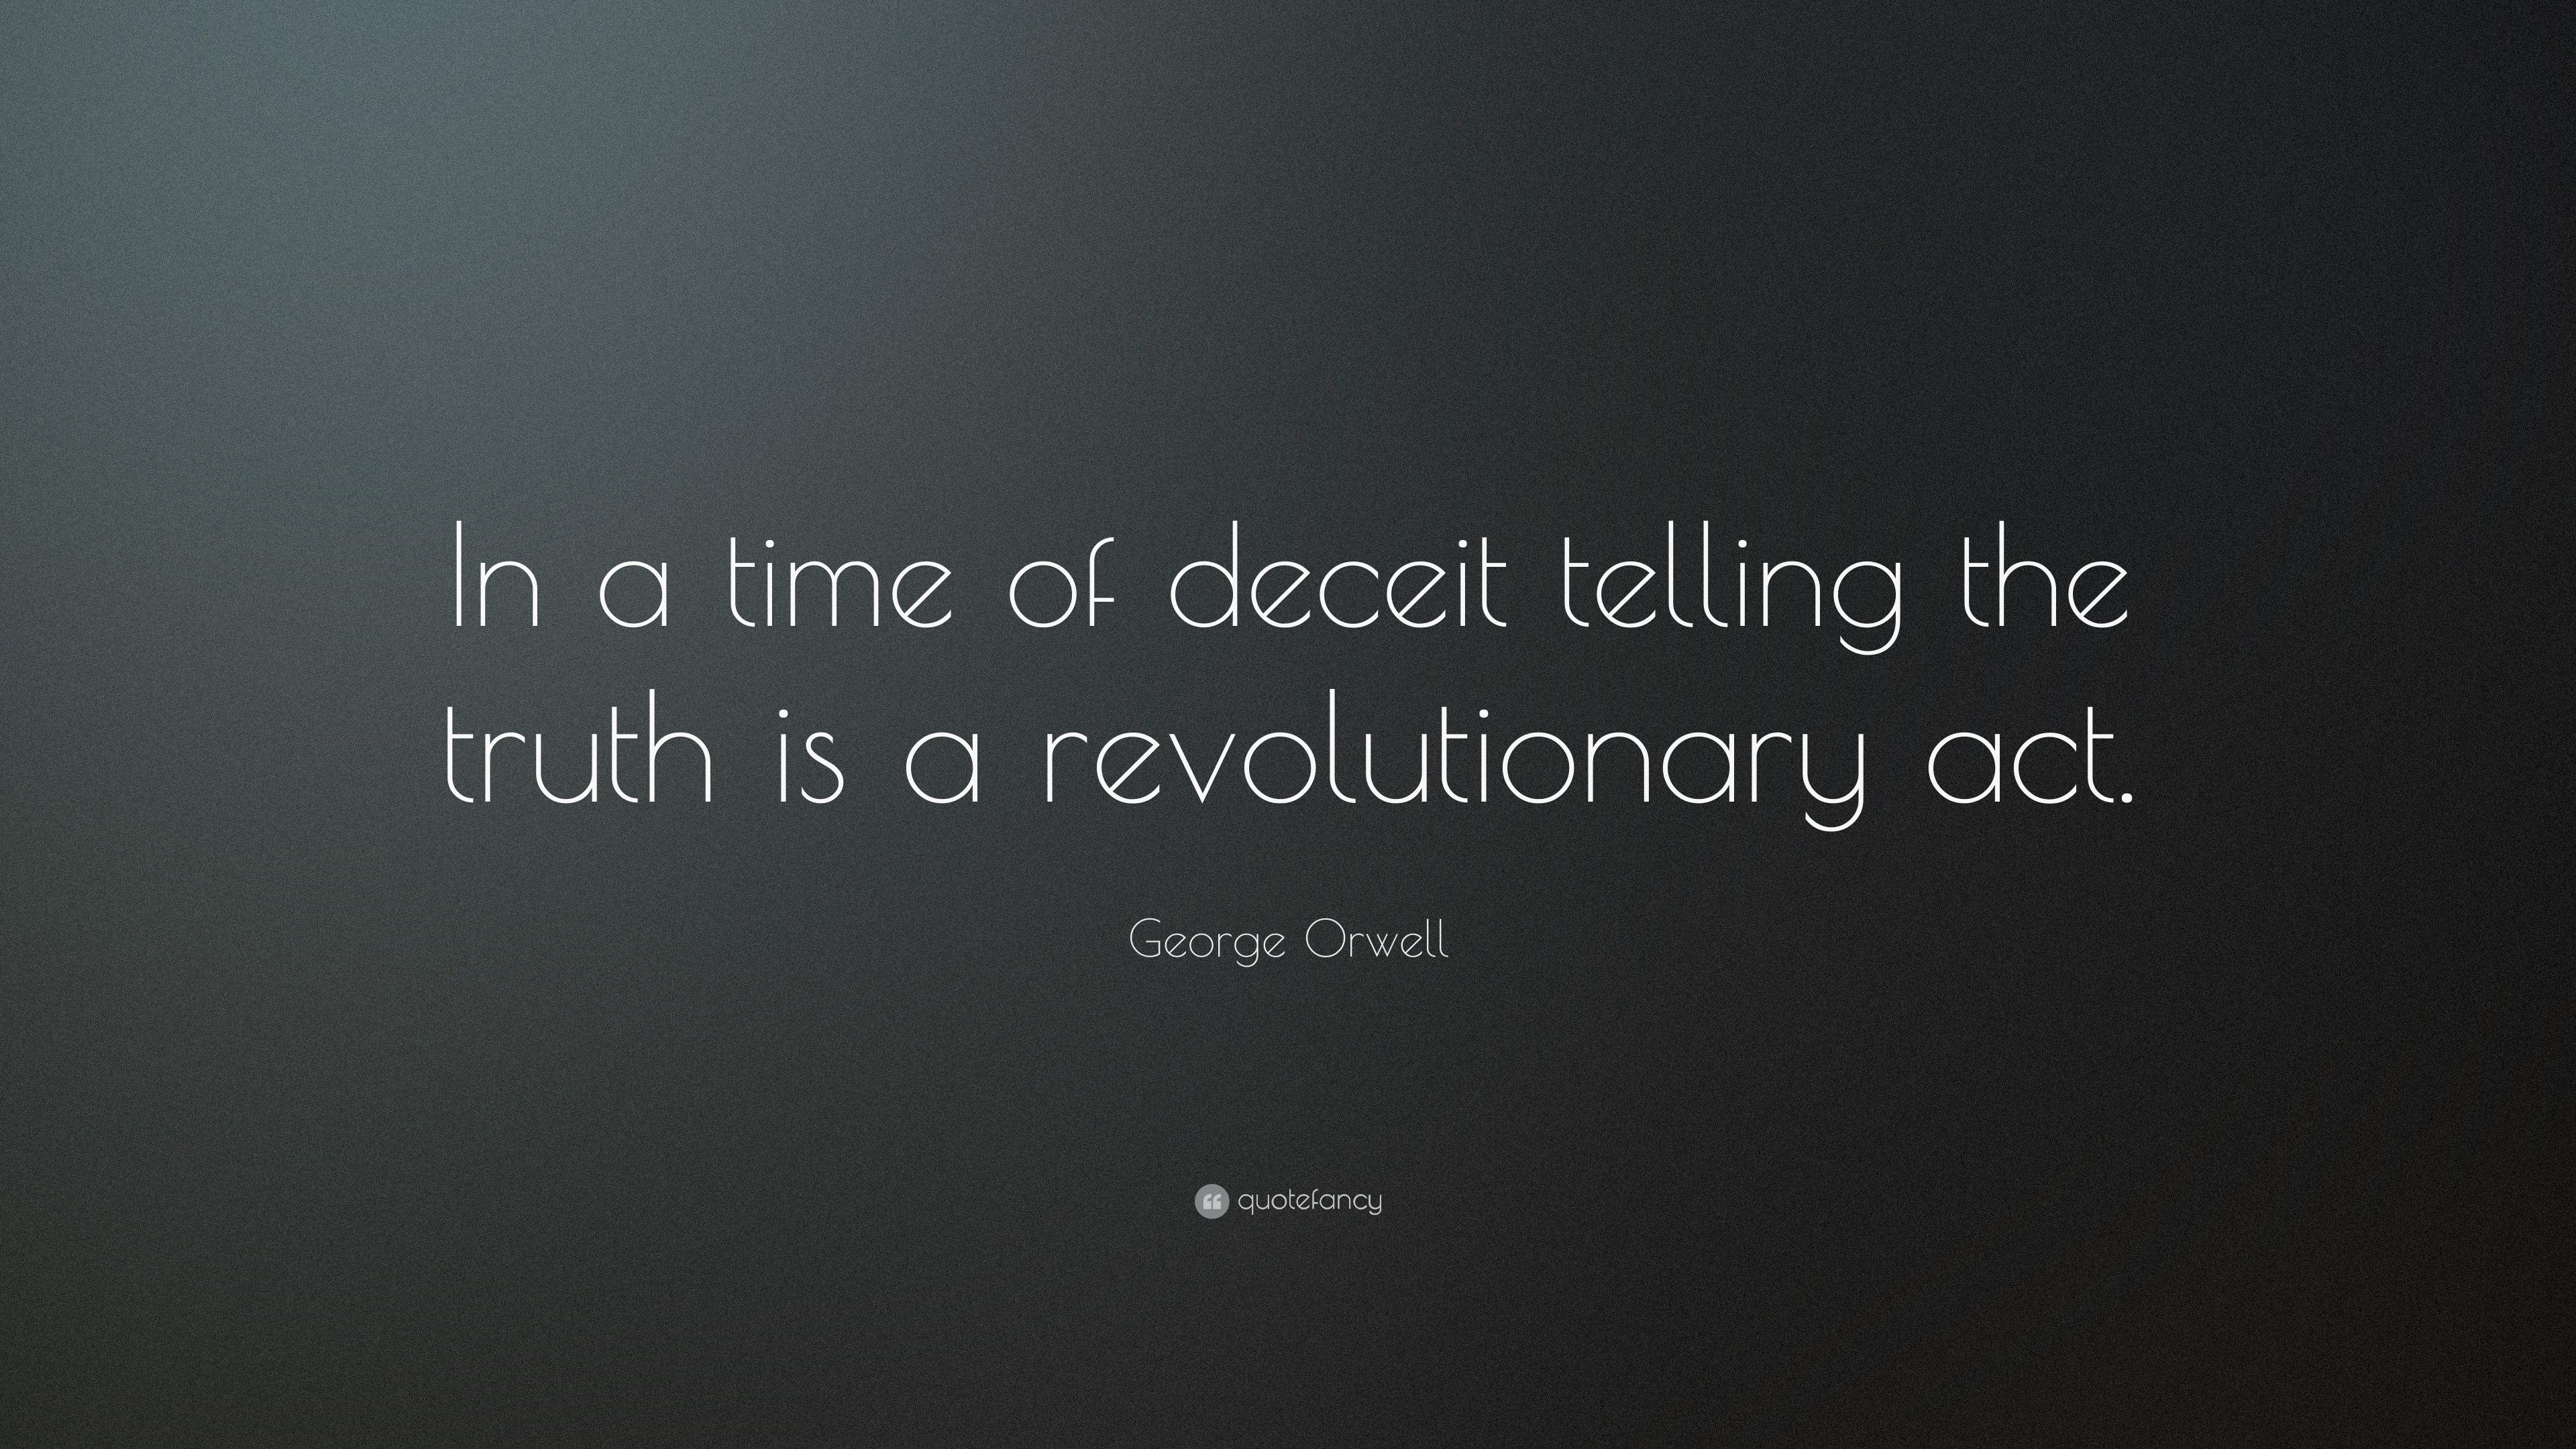 George Orwell Quote: “In a time of deceit telling the truth is a